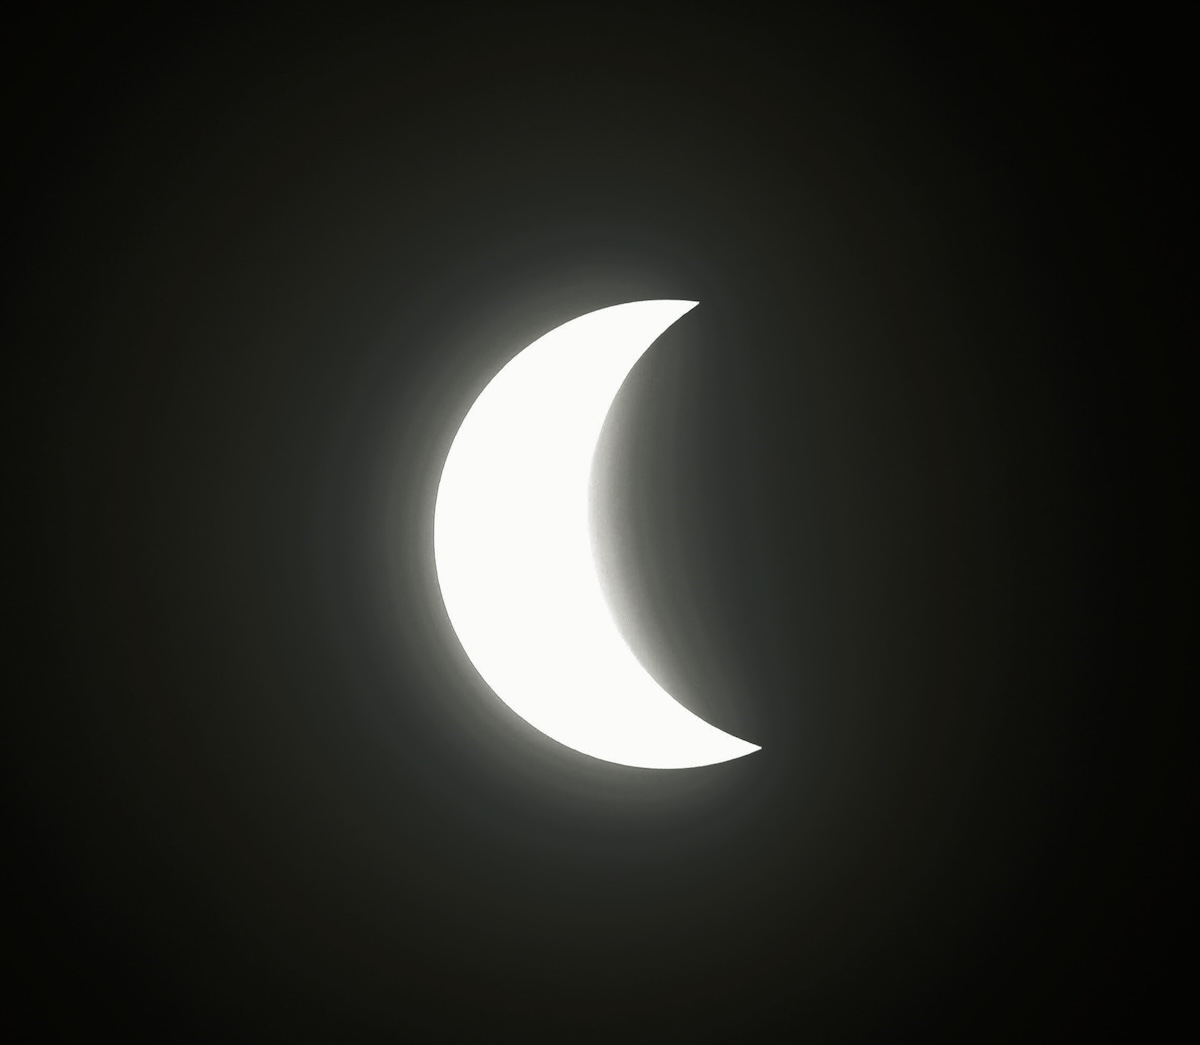 Solar eclipse view from Ocala